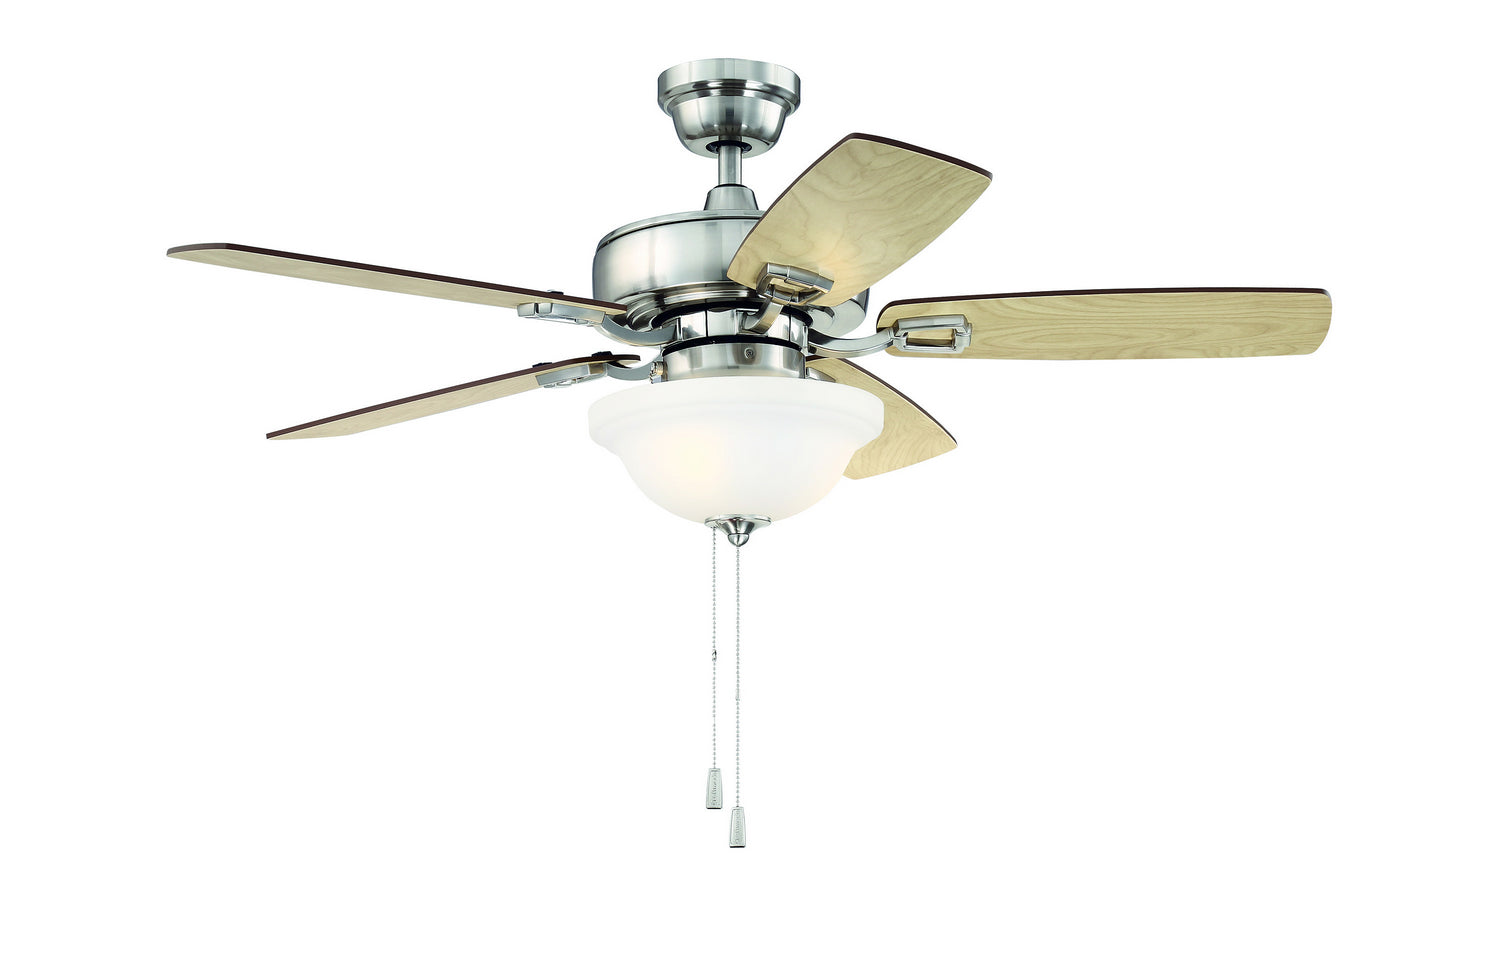 Craftmade Twist N Click TCE52BNK5C1 Ceiling Fan 52 Inch with Light - Brushed Polished Nickel, Ash/Mahogany